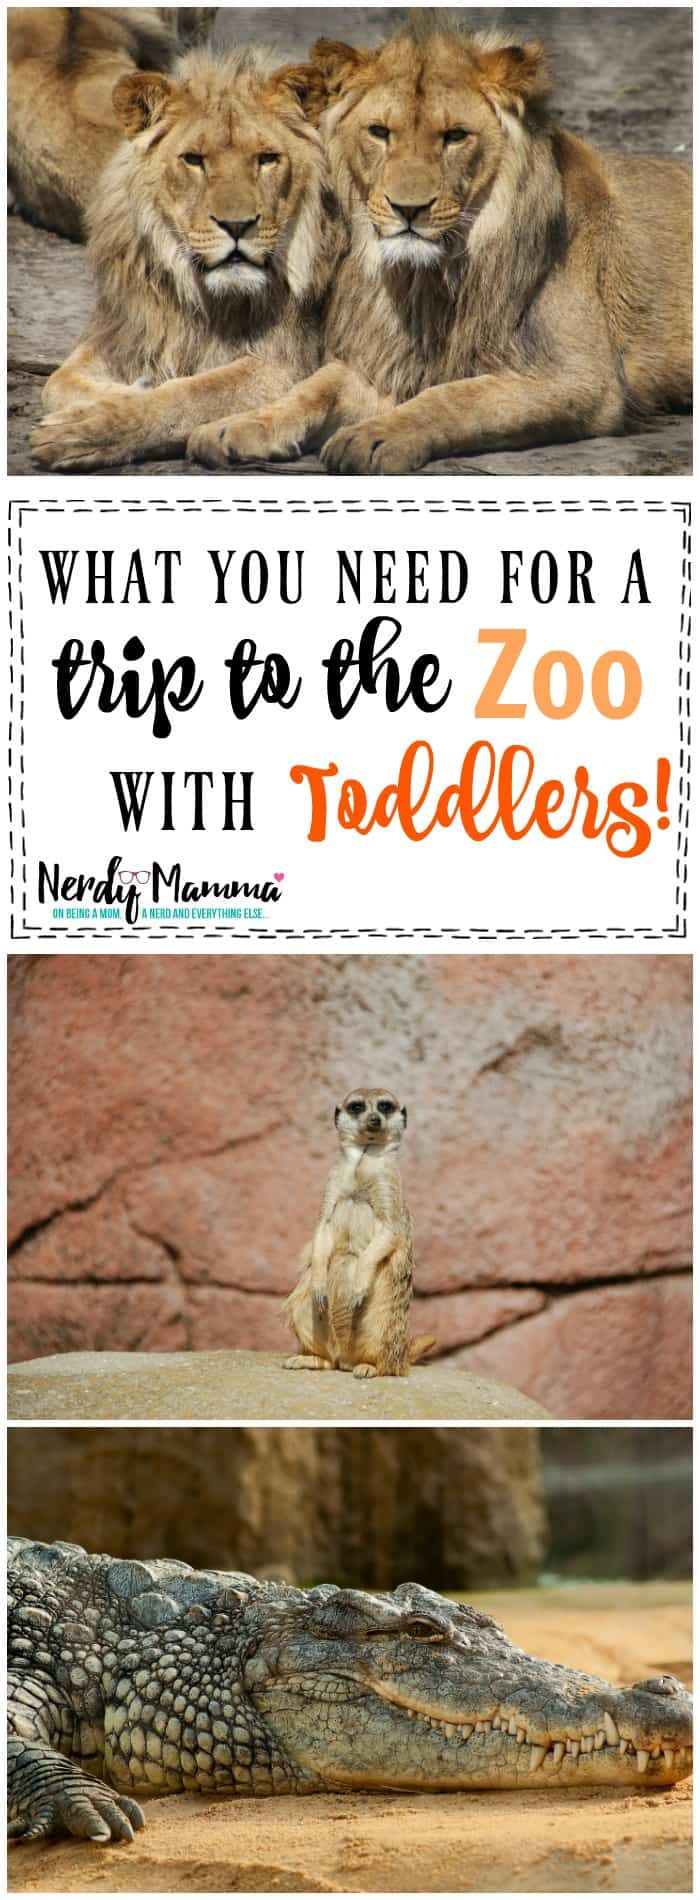 what you need for a trip to the zoo with toddlers